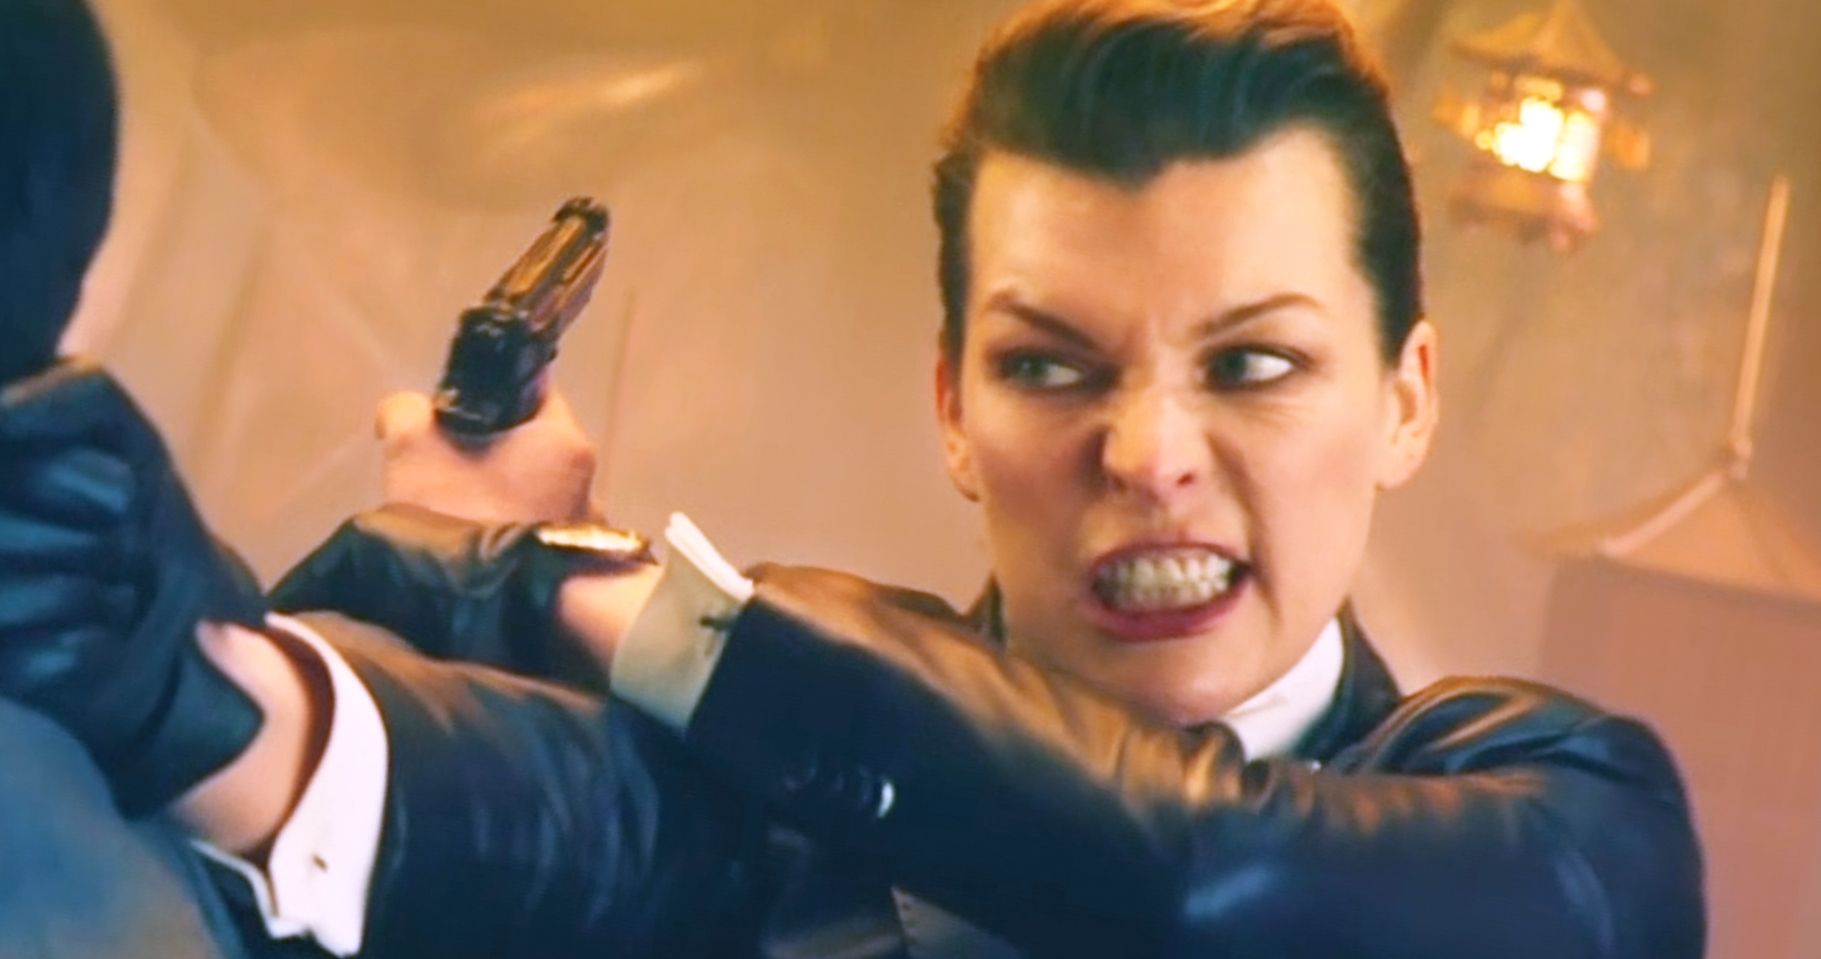 The Rookies Preview Has Milla Jovovich Crushing Enemies in the High-tech Action Epic [Exclusive]